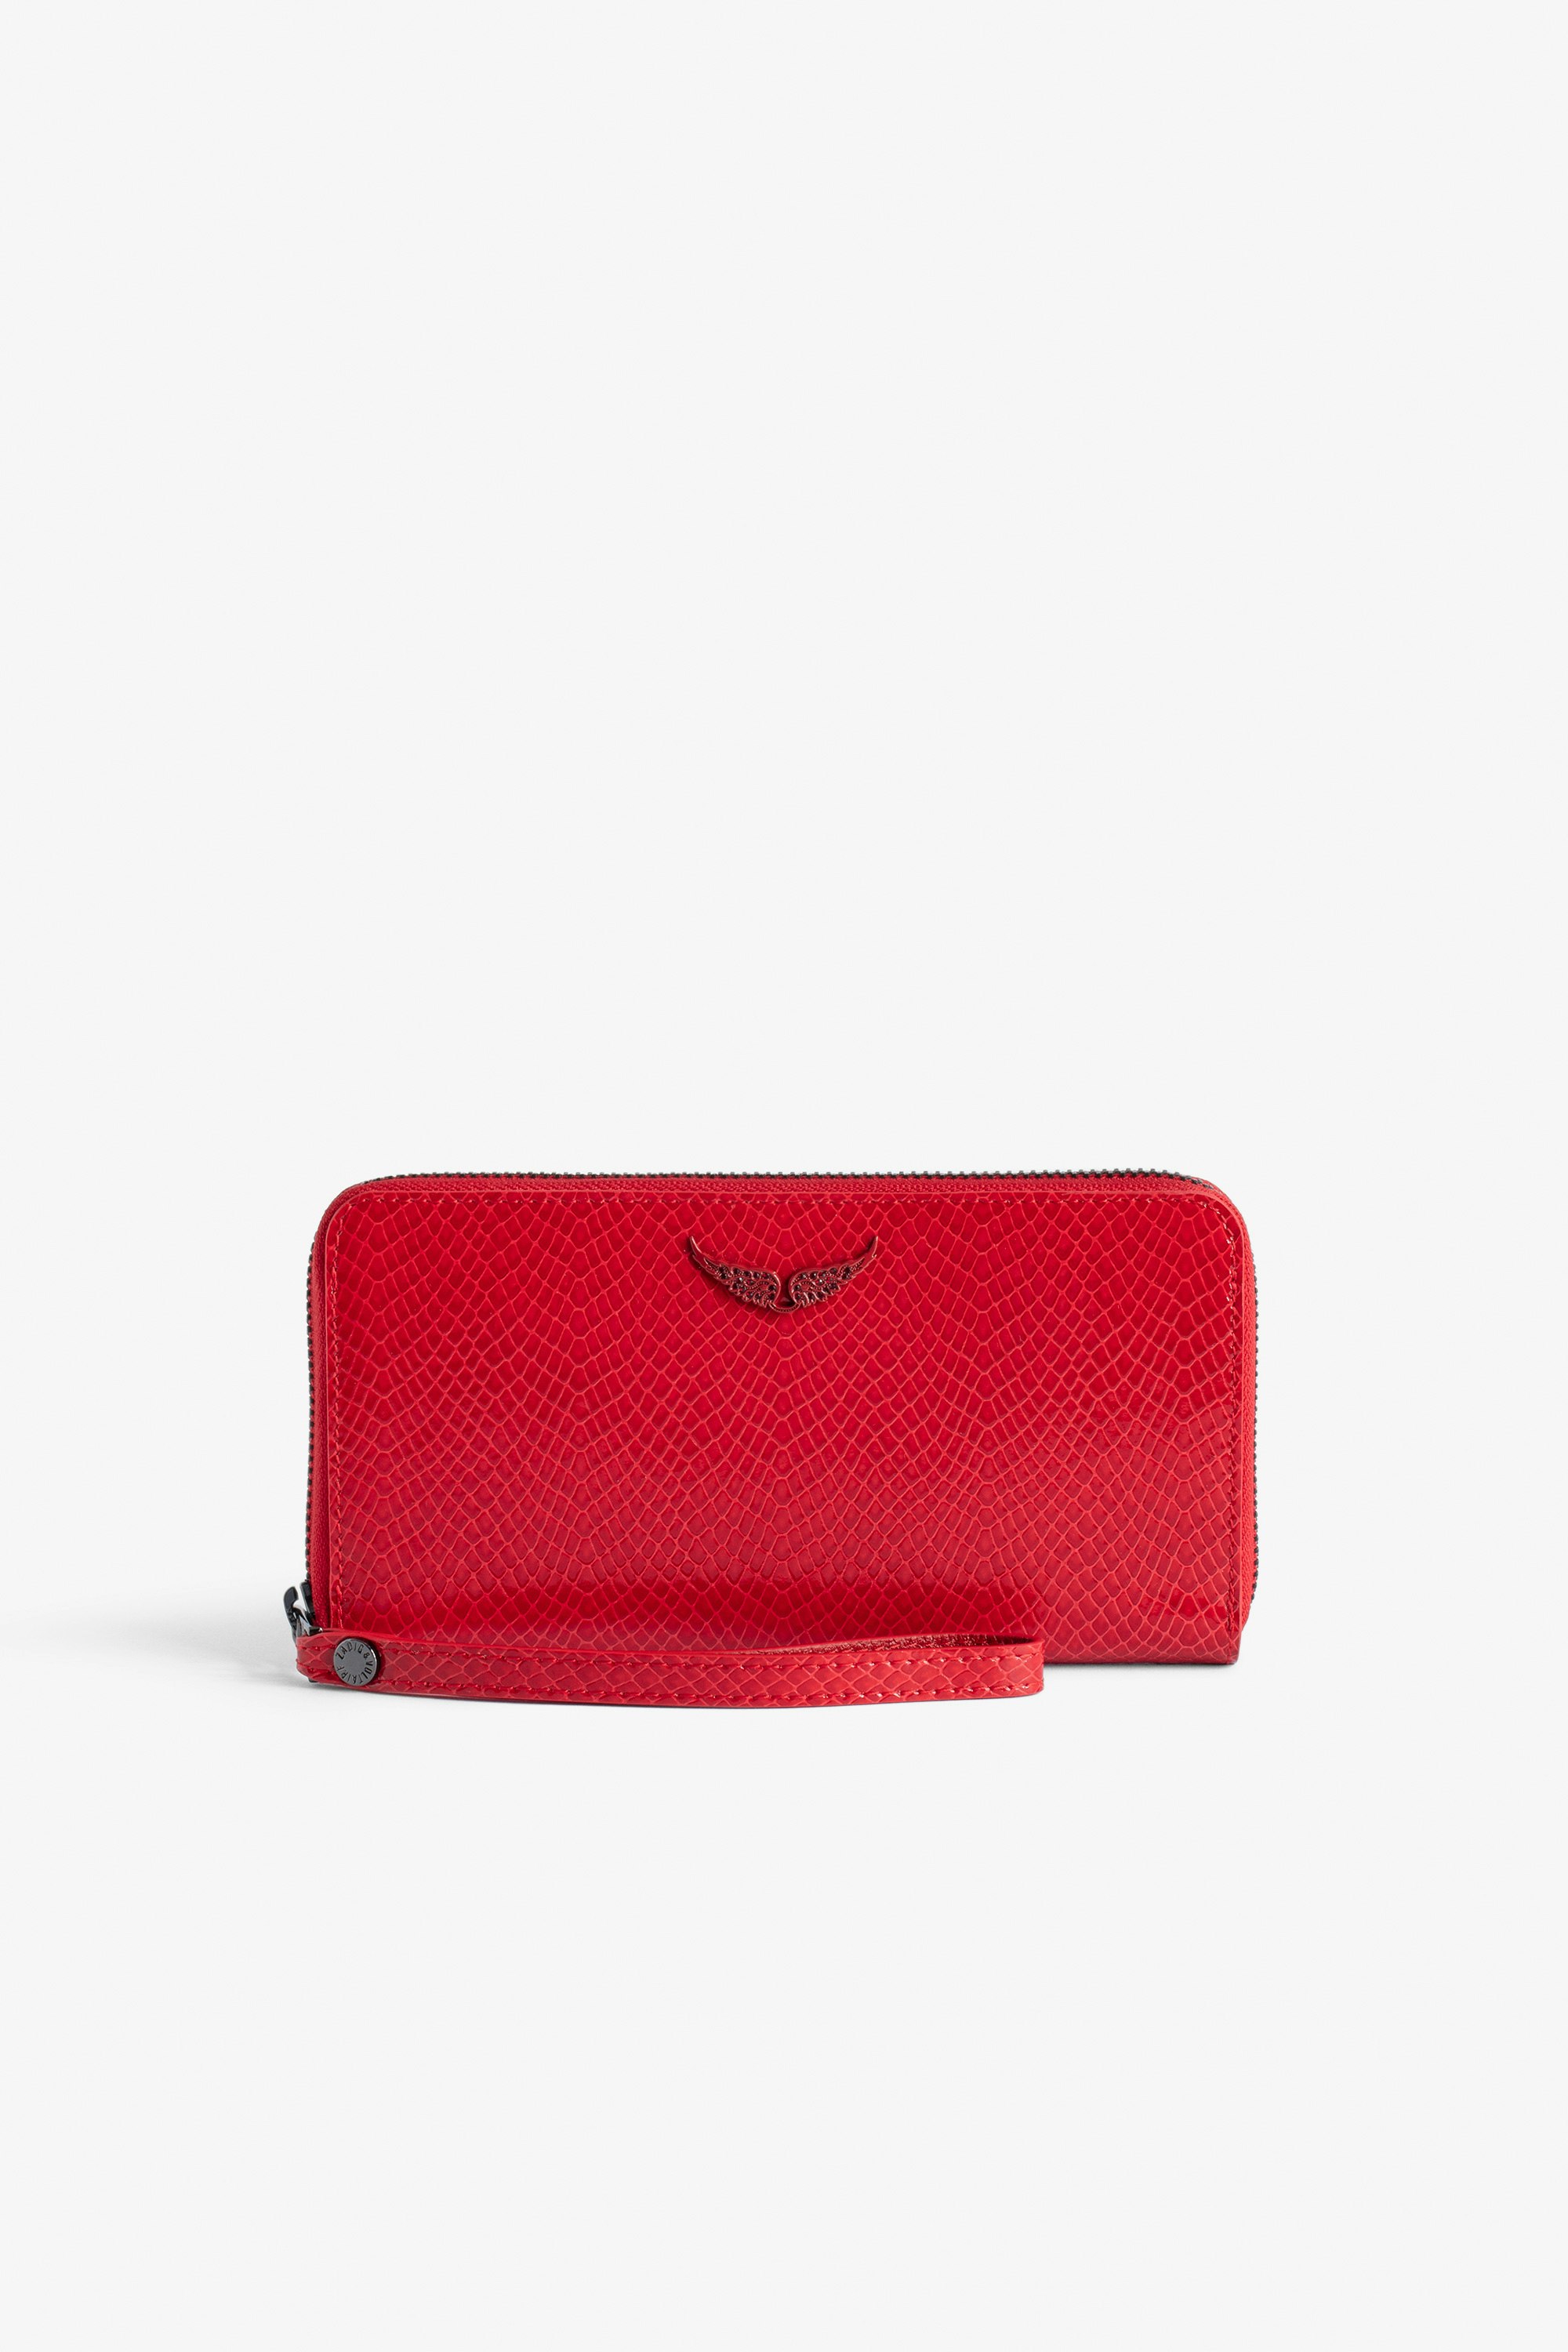 Compagnon Glossy Wild Embossed Wallet - Women’s red python-effect patent leather clutch with wings charm.